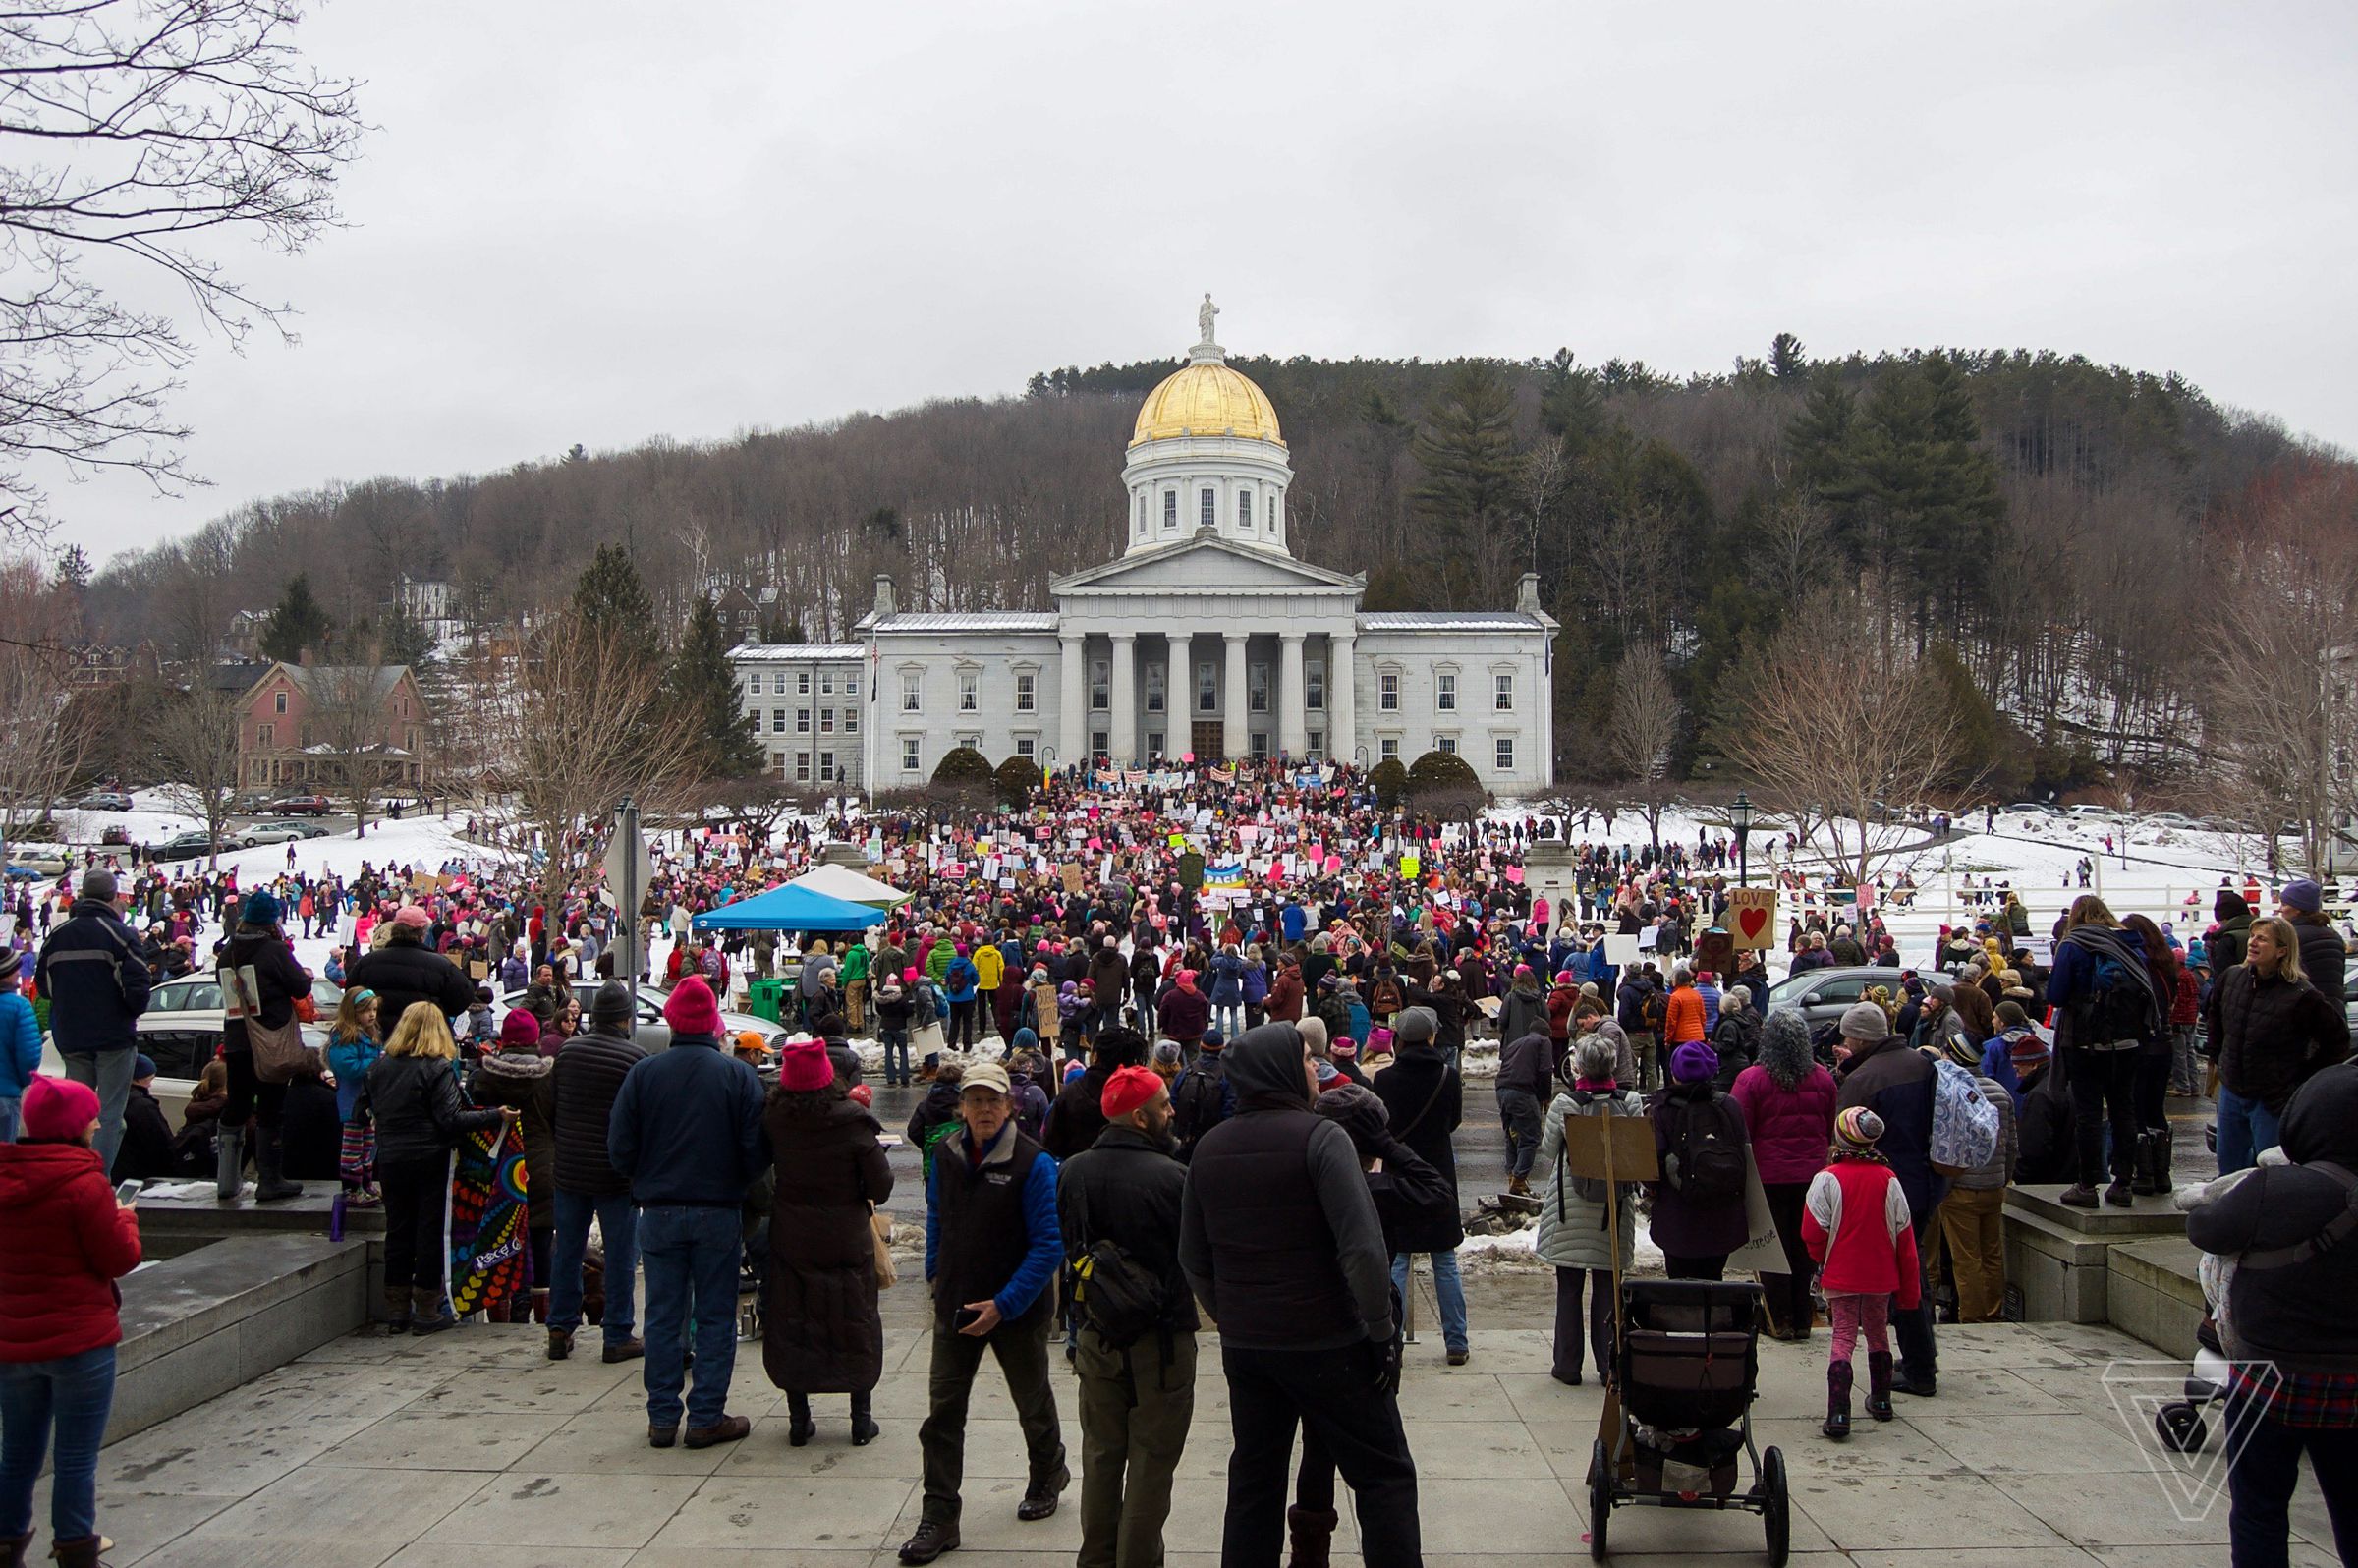 Montpelier, Vermont: Traffic from an estimated 15,000 to 20,000 demonstrators prompted the State Police to shut down the interstate.